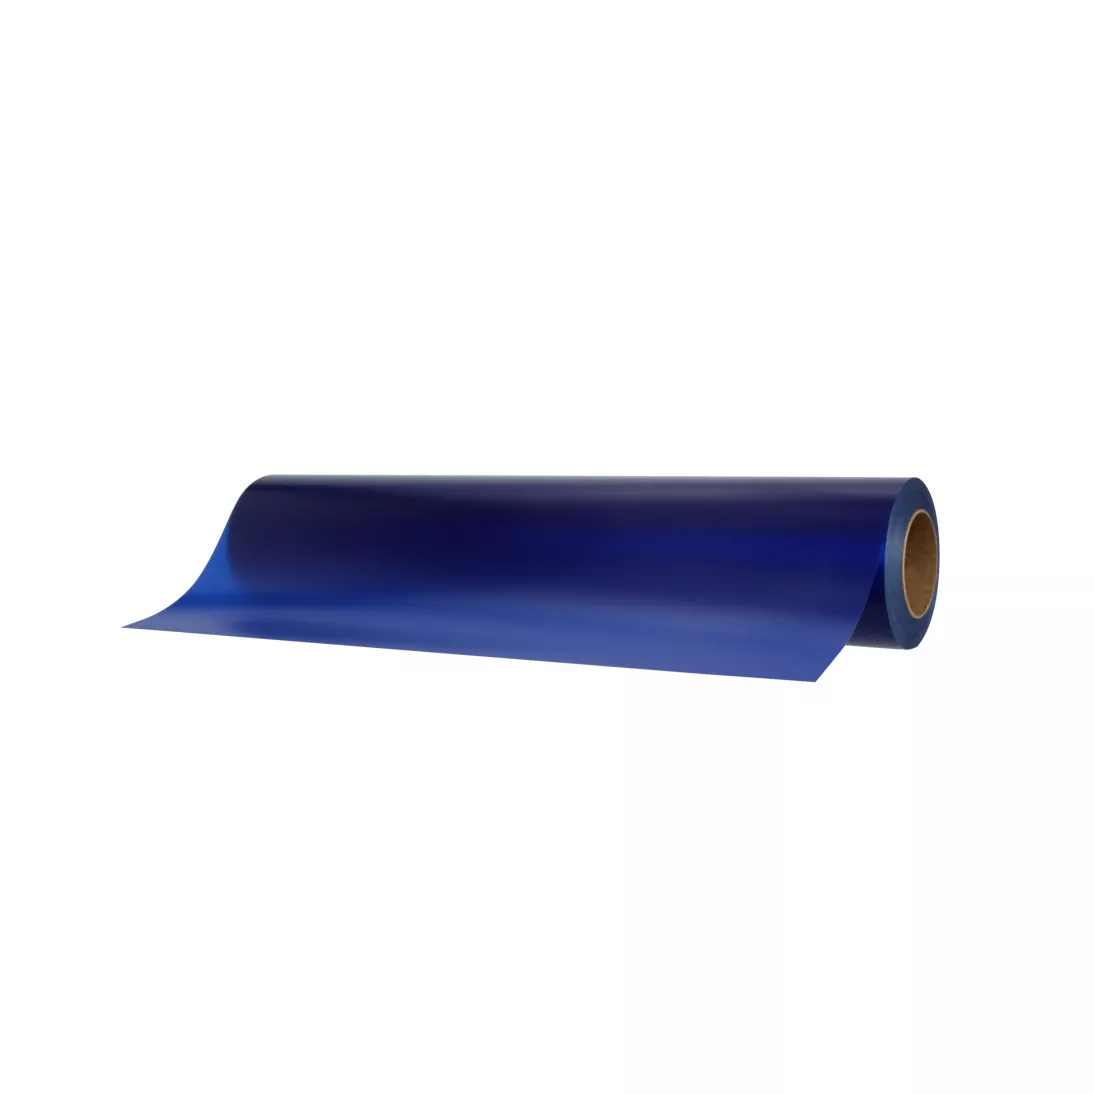 3M™ Scotchcal™ Translucent Graphic Film 3630-27, Electric Blue, 48 in x
50 yd